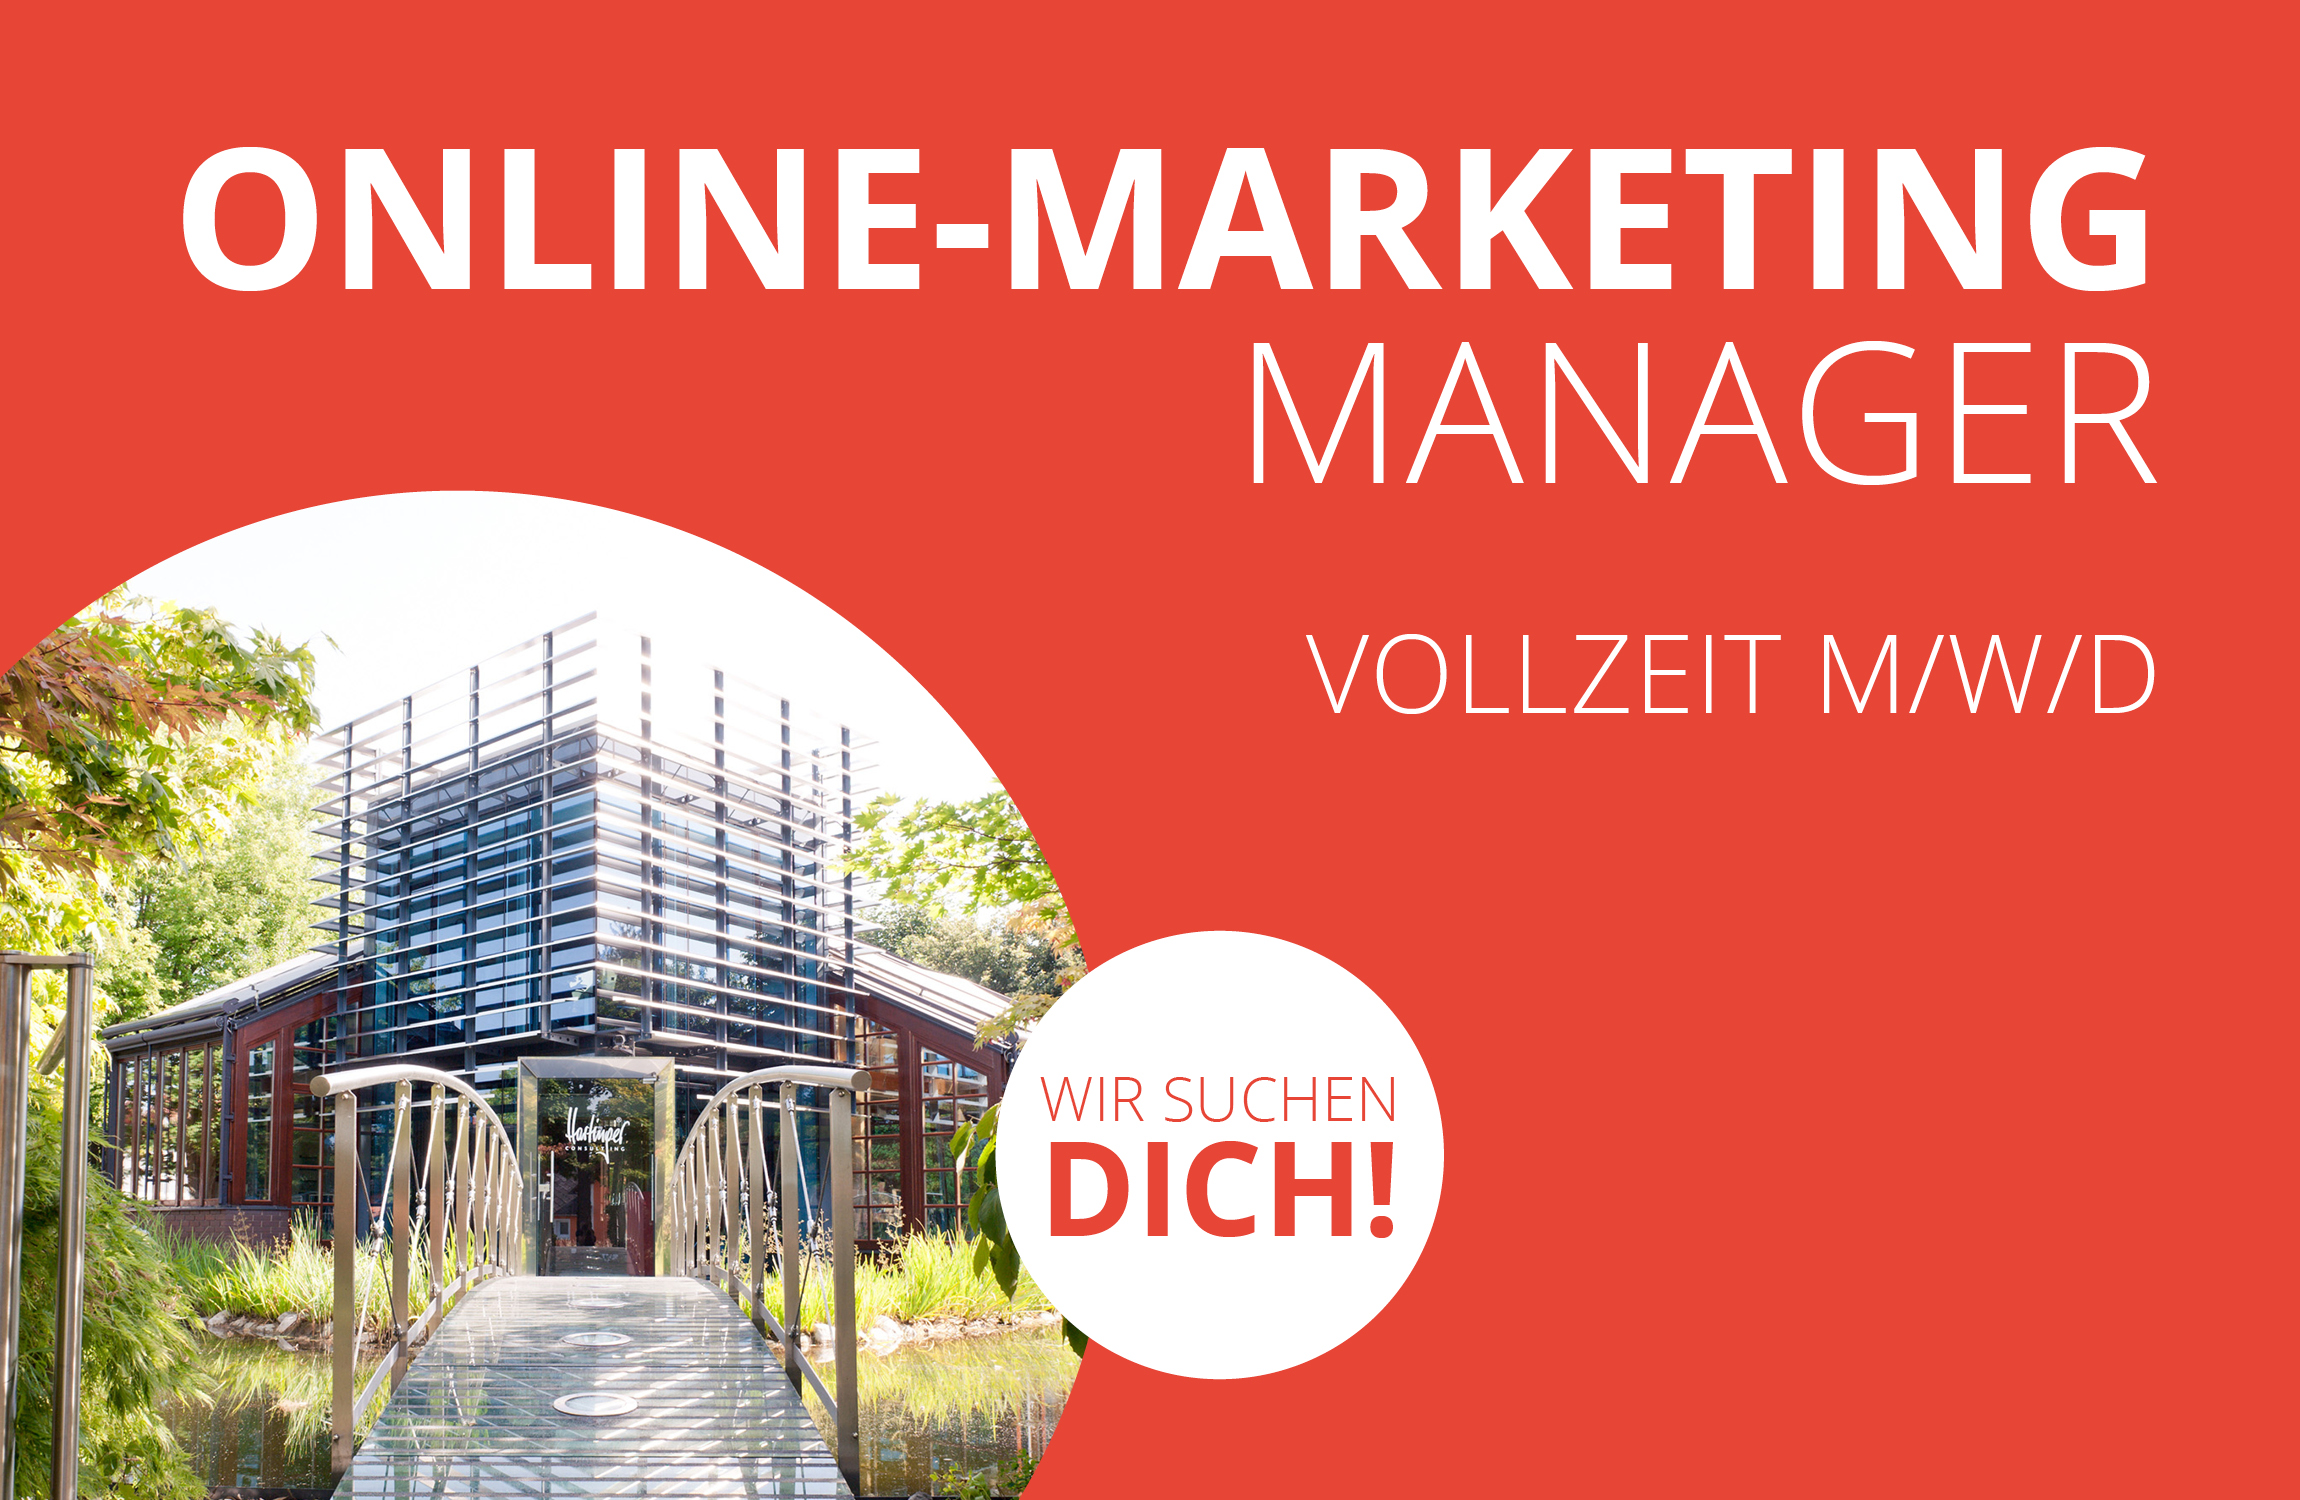 Online Marketing Manager (W/M/D)